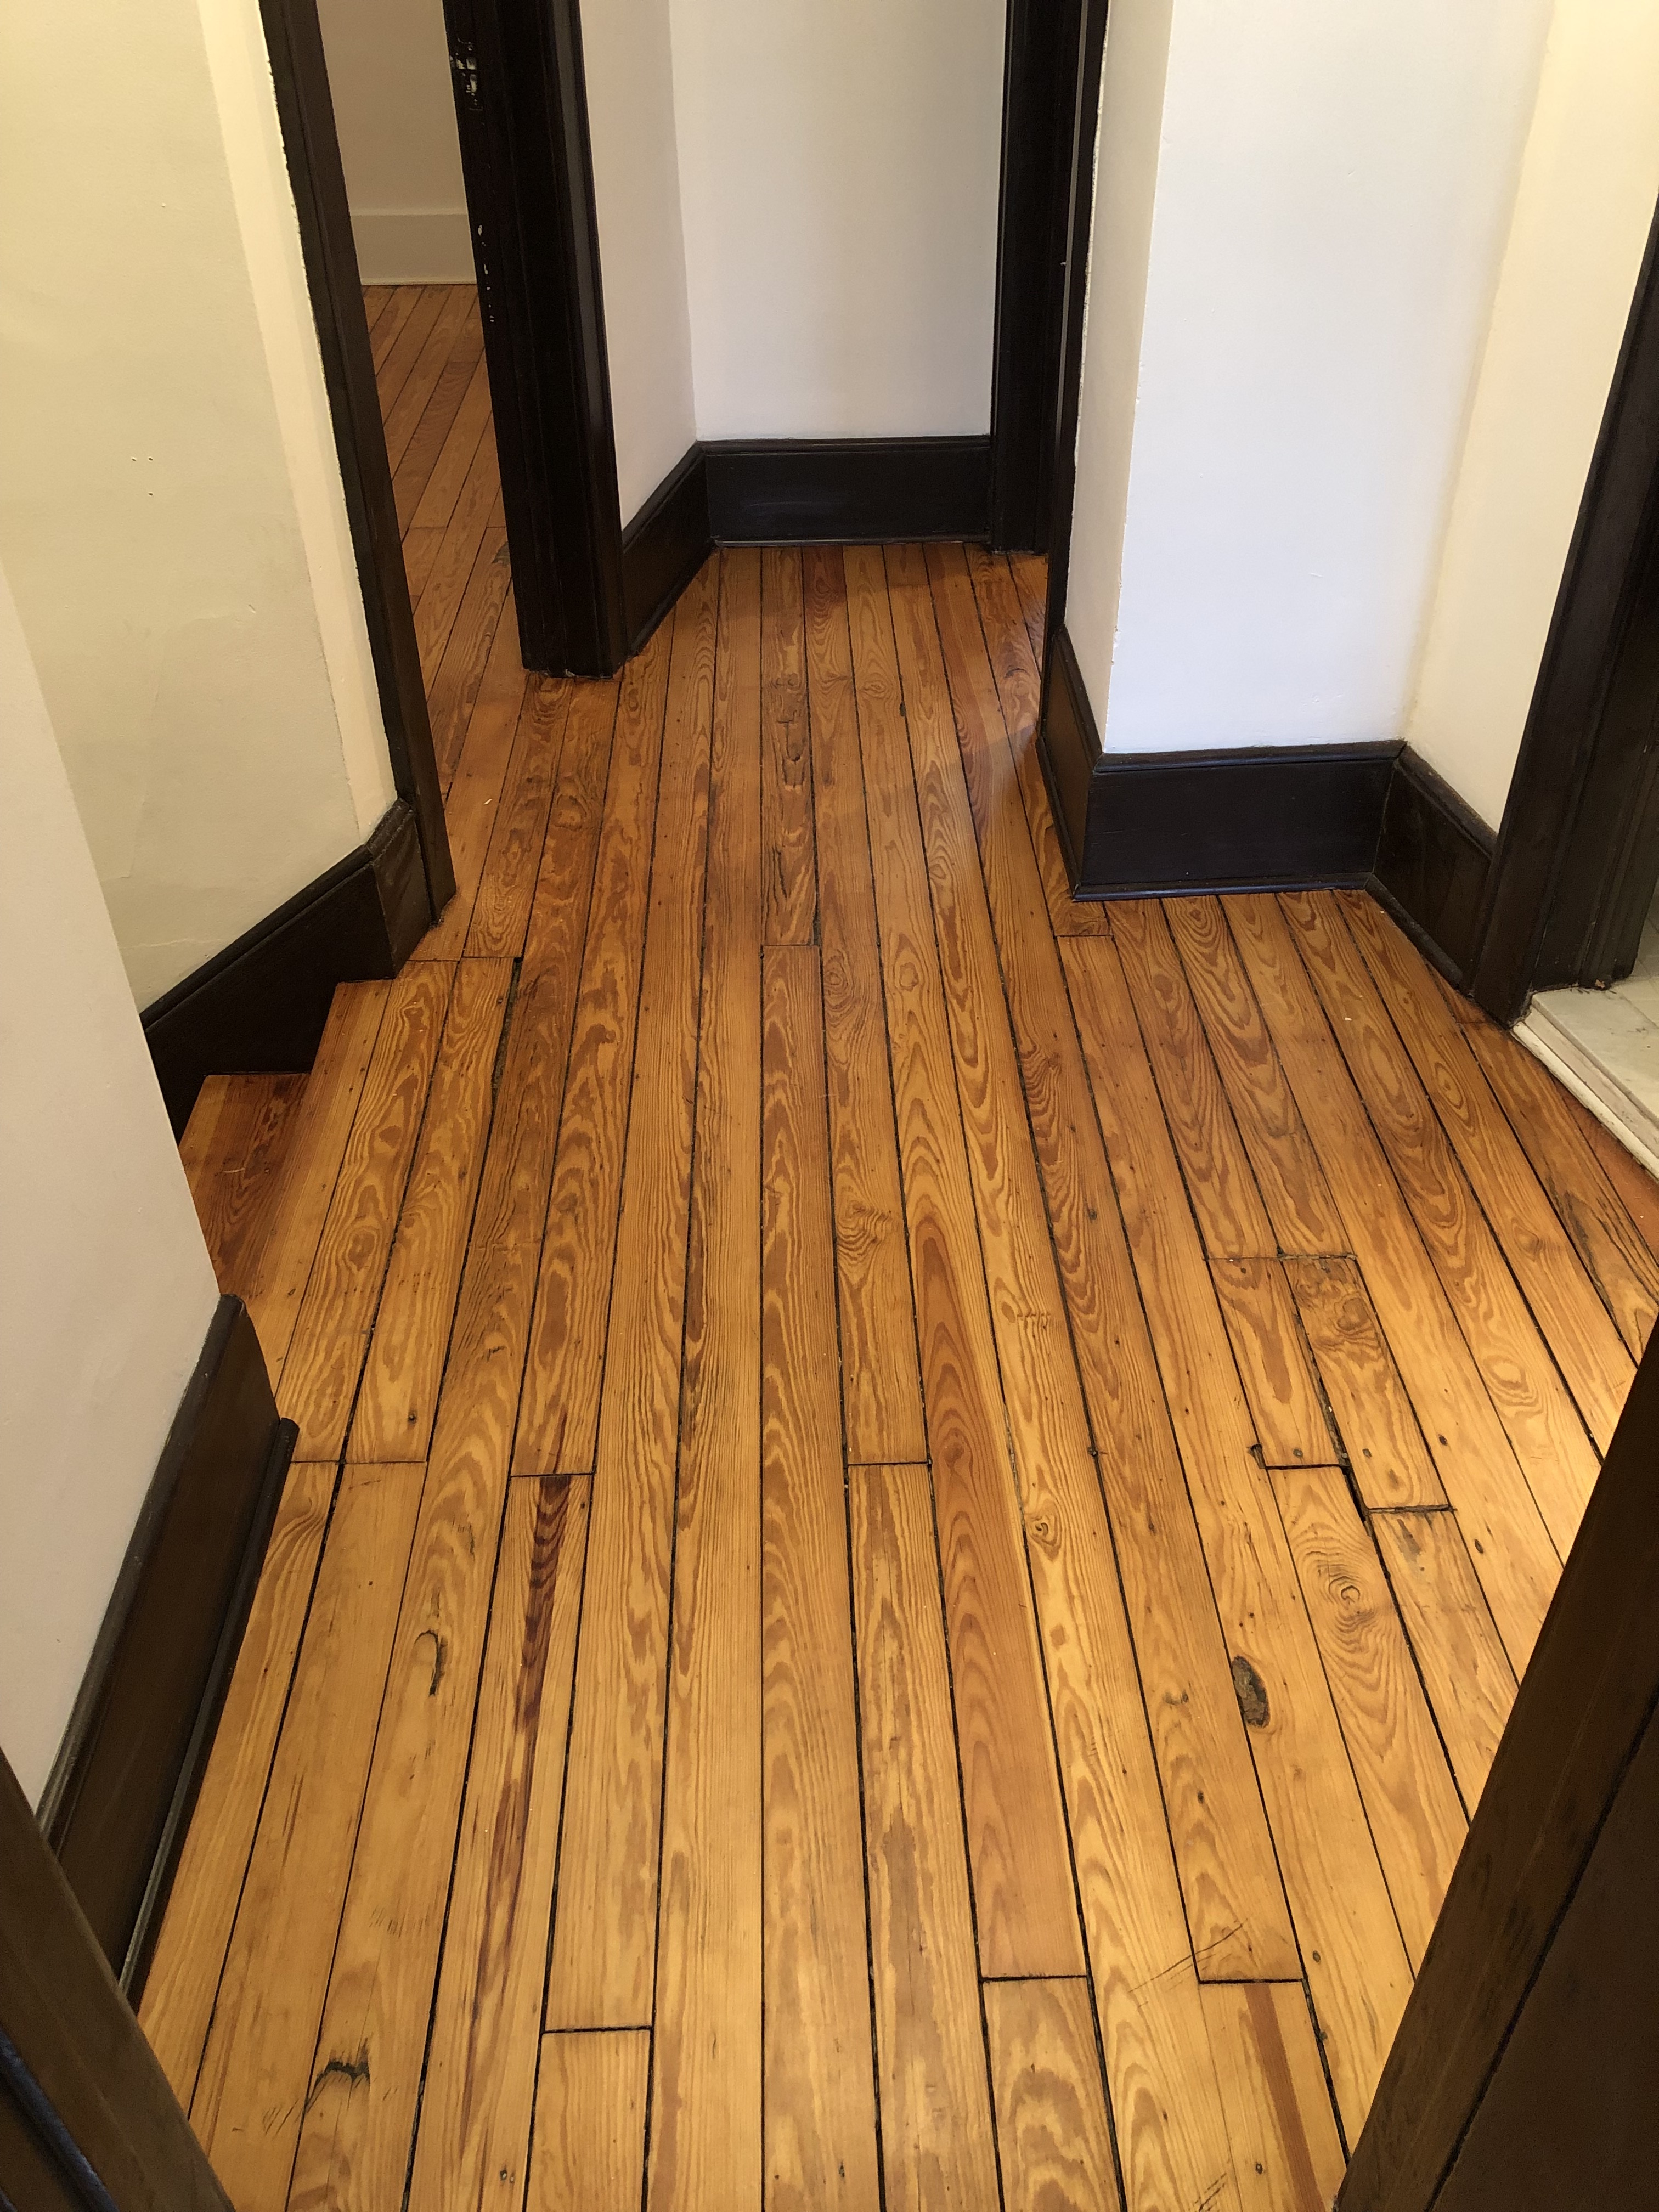 How To Refinish Hardwood Floors Step, How To Refinish Hardwood Floors Diy